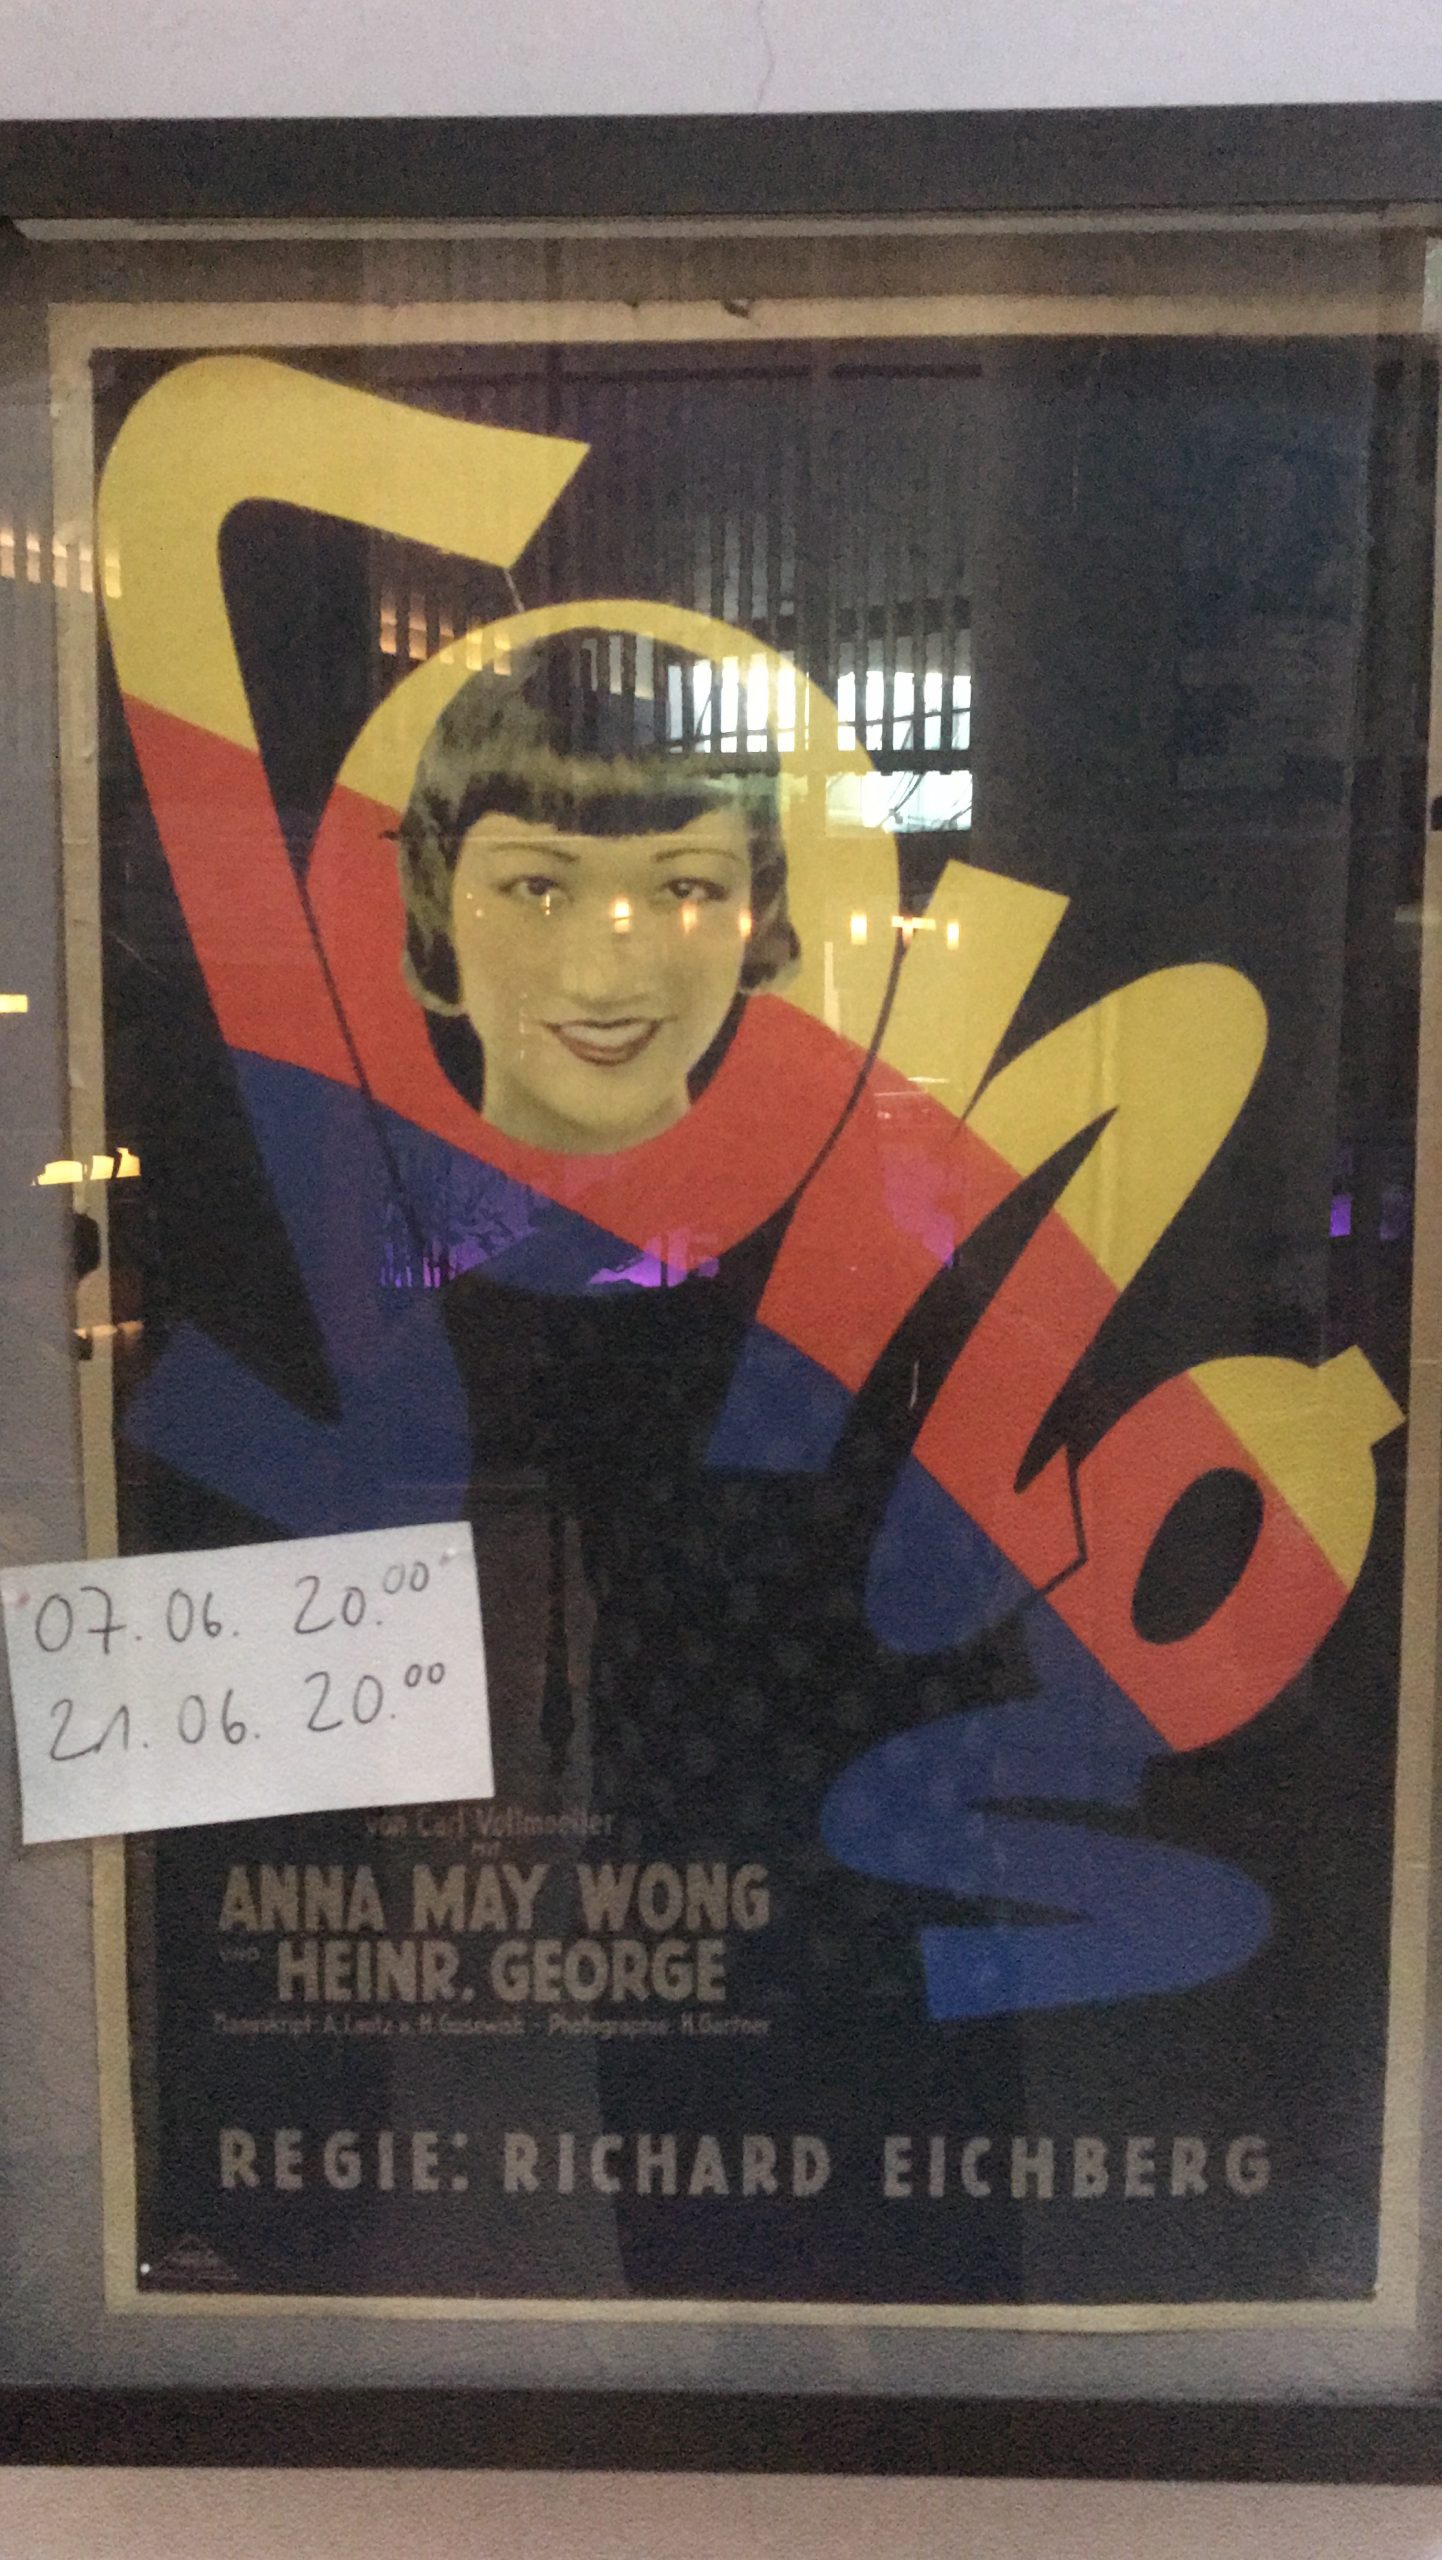 A framed, black movie poster with yellow-red-blue headline across the whole poster: “SONG”. Anna May Wong's face fills the “O” in “SONG” from inside. At the bottom it reads “Anna May Wong, Heinr. George. Regie Richard Eichberg” (translated: Anna May Wong, Heinr. George. Directed by Richard Eichberg). To the left above the frame is a white slip of paper with black writing, it says “07.06. 8pm, 21.06. 8pm”.